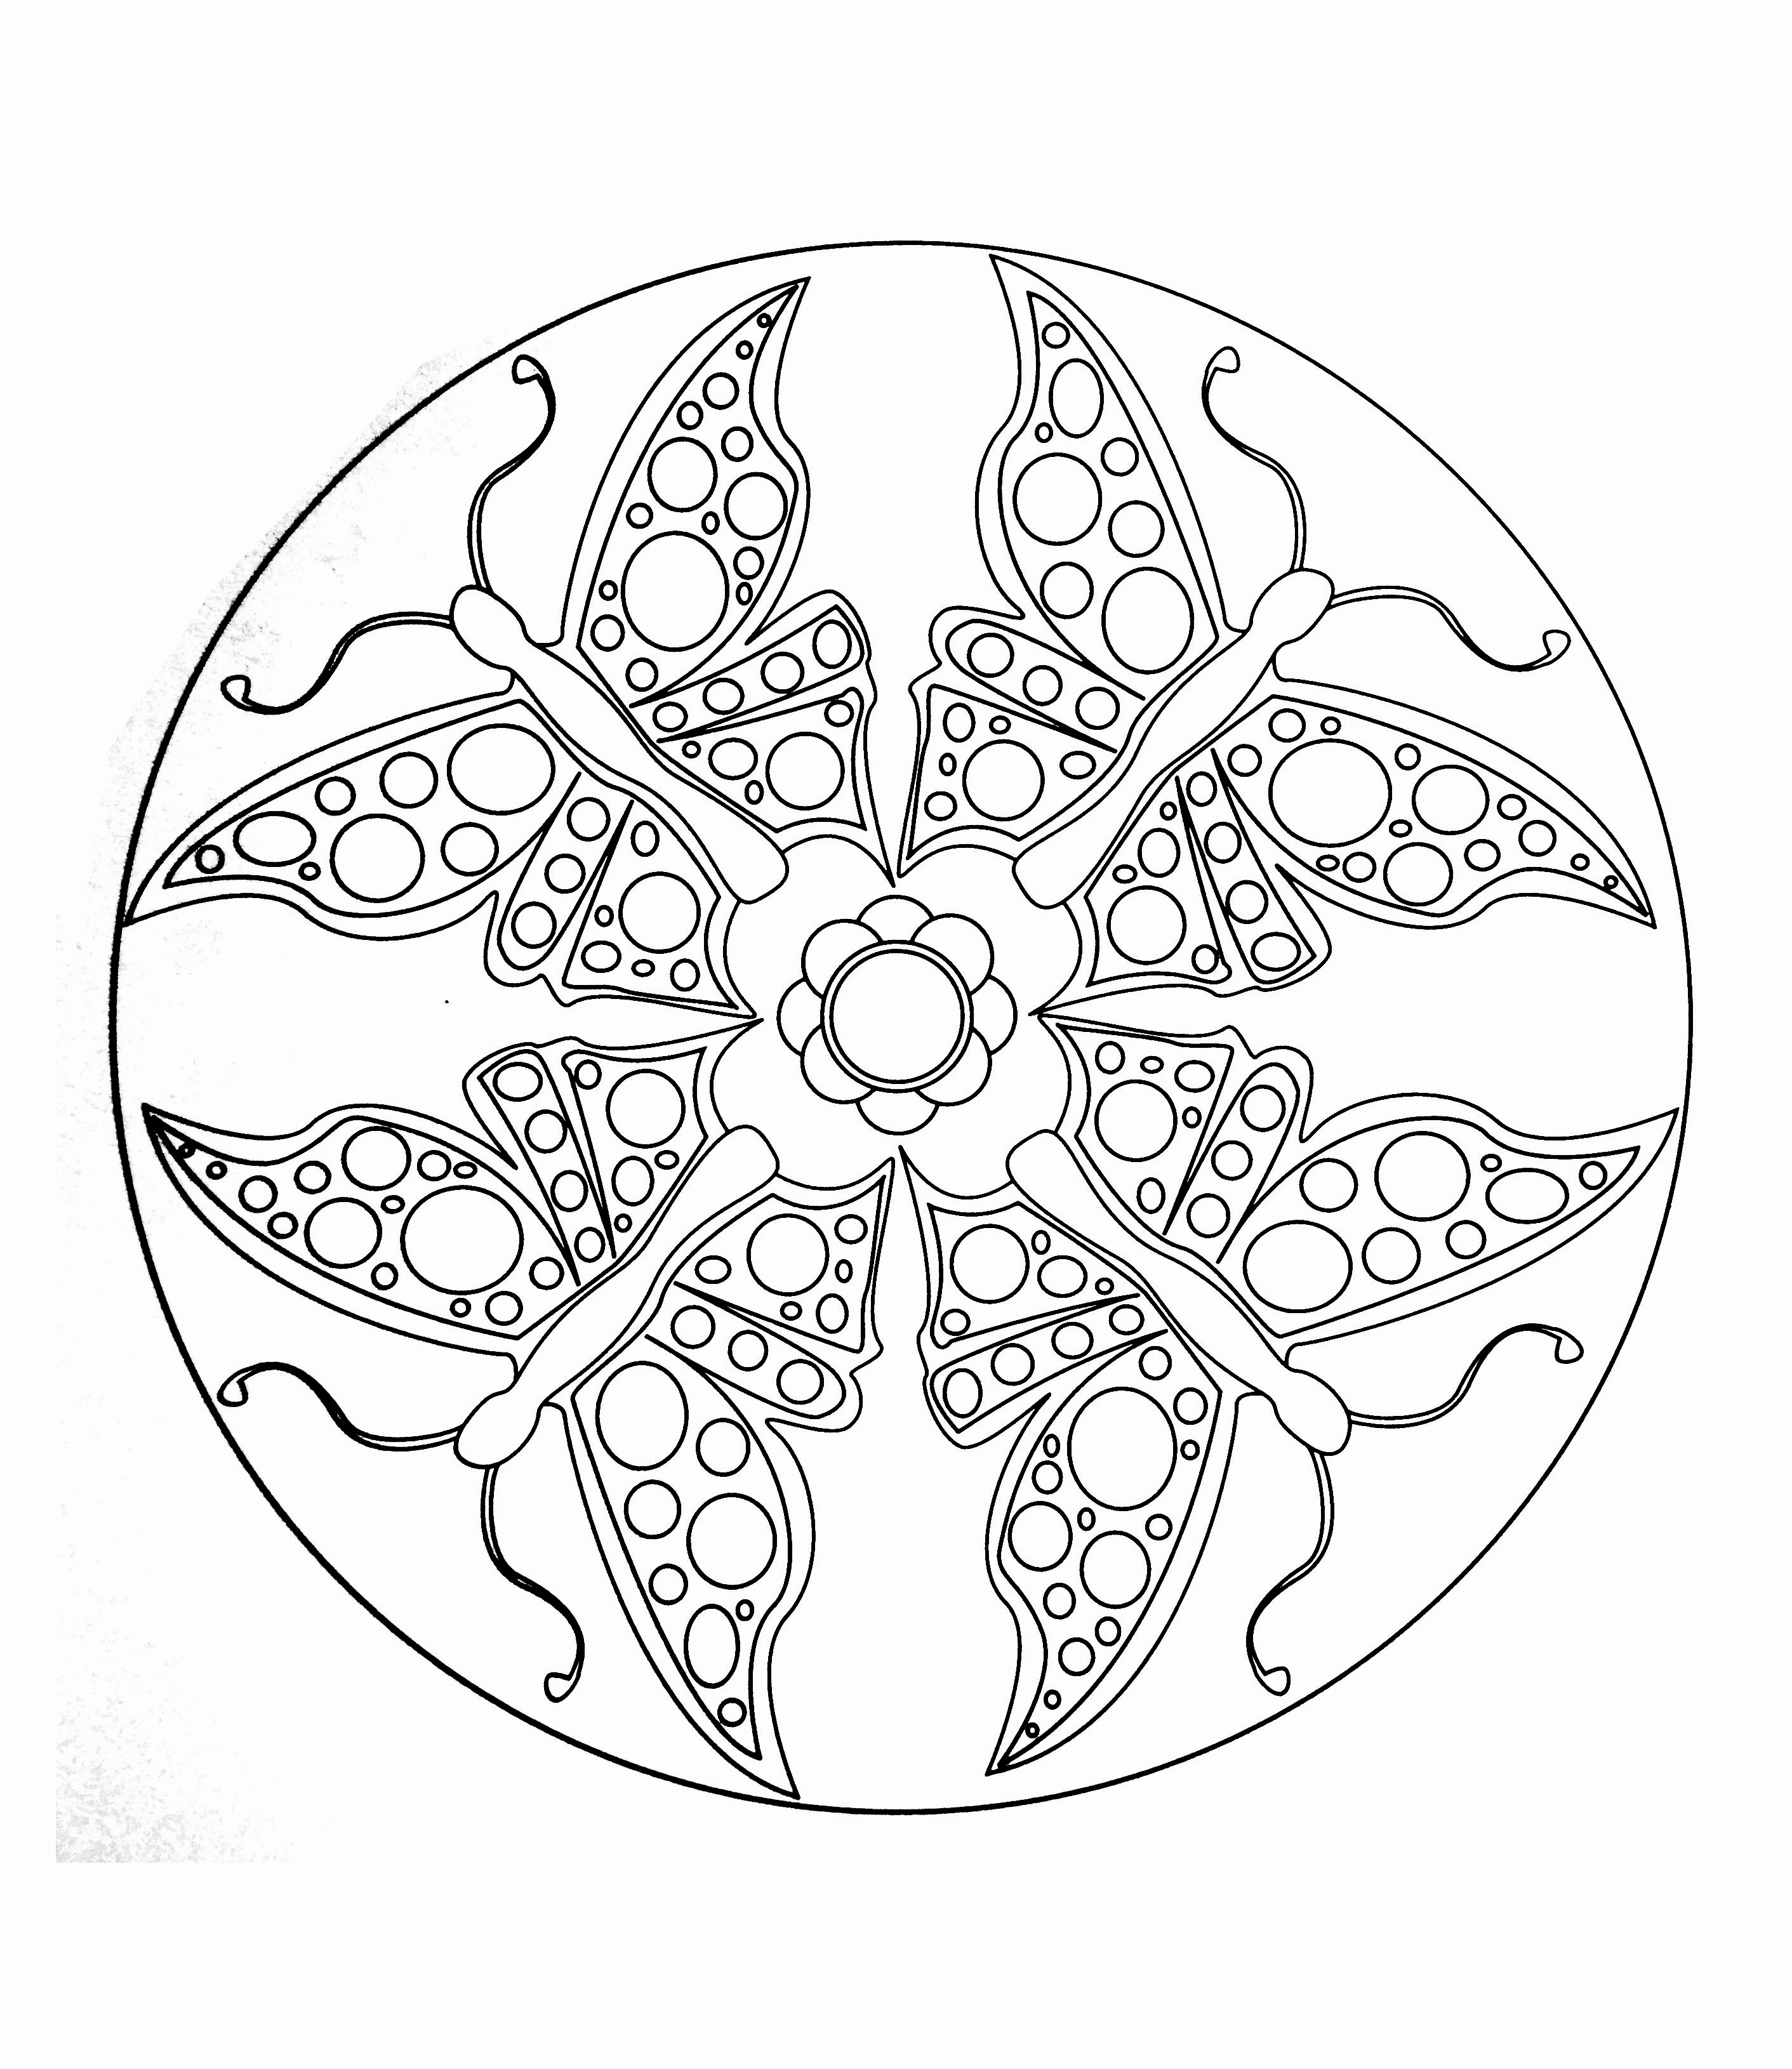 Simple mandala 18 - M&alas Coloring pages for kids to ...